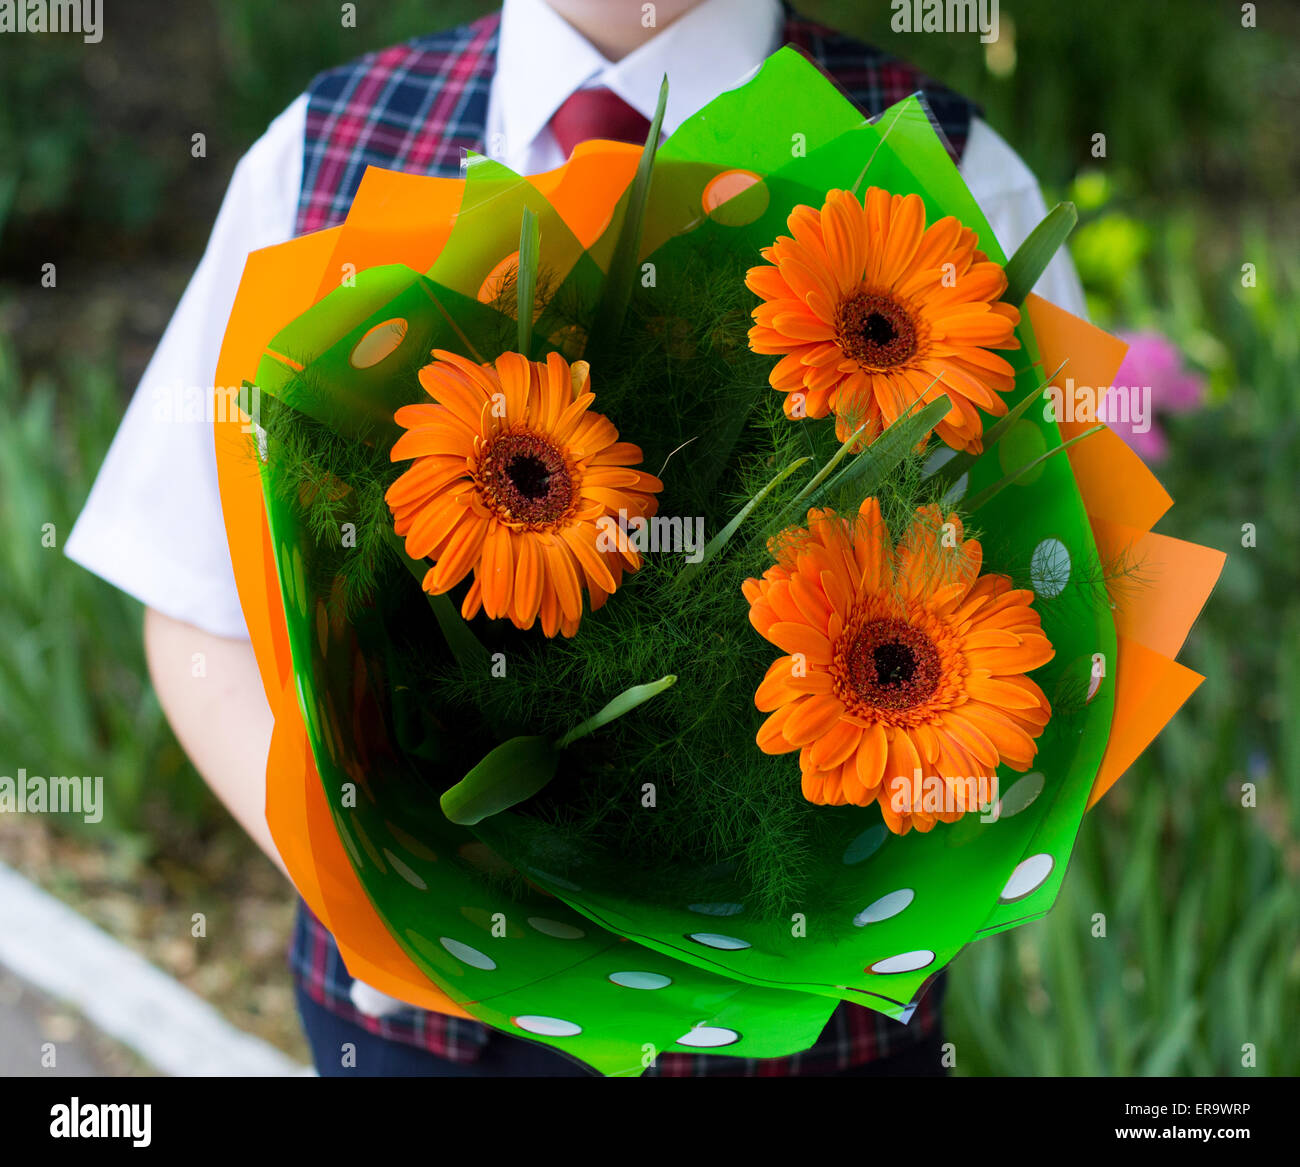 the school student with flowers, a close up, flowers in the center Stock Photo